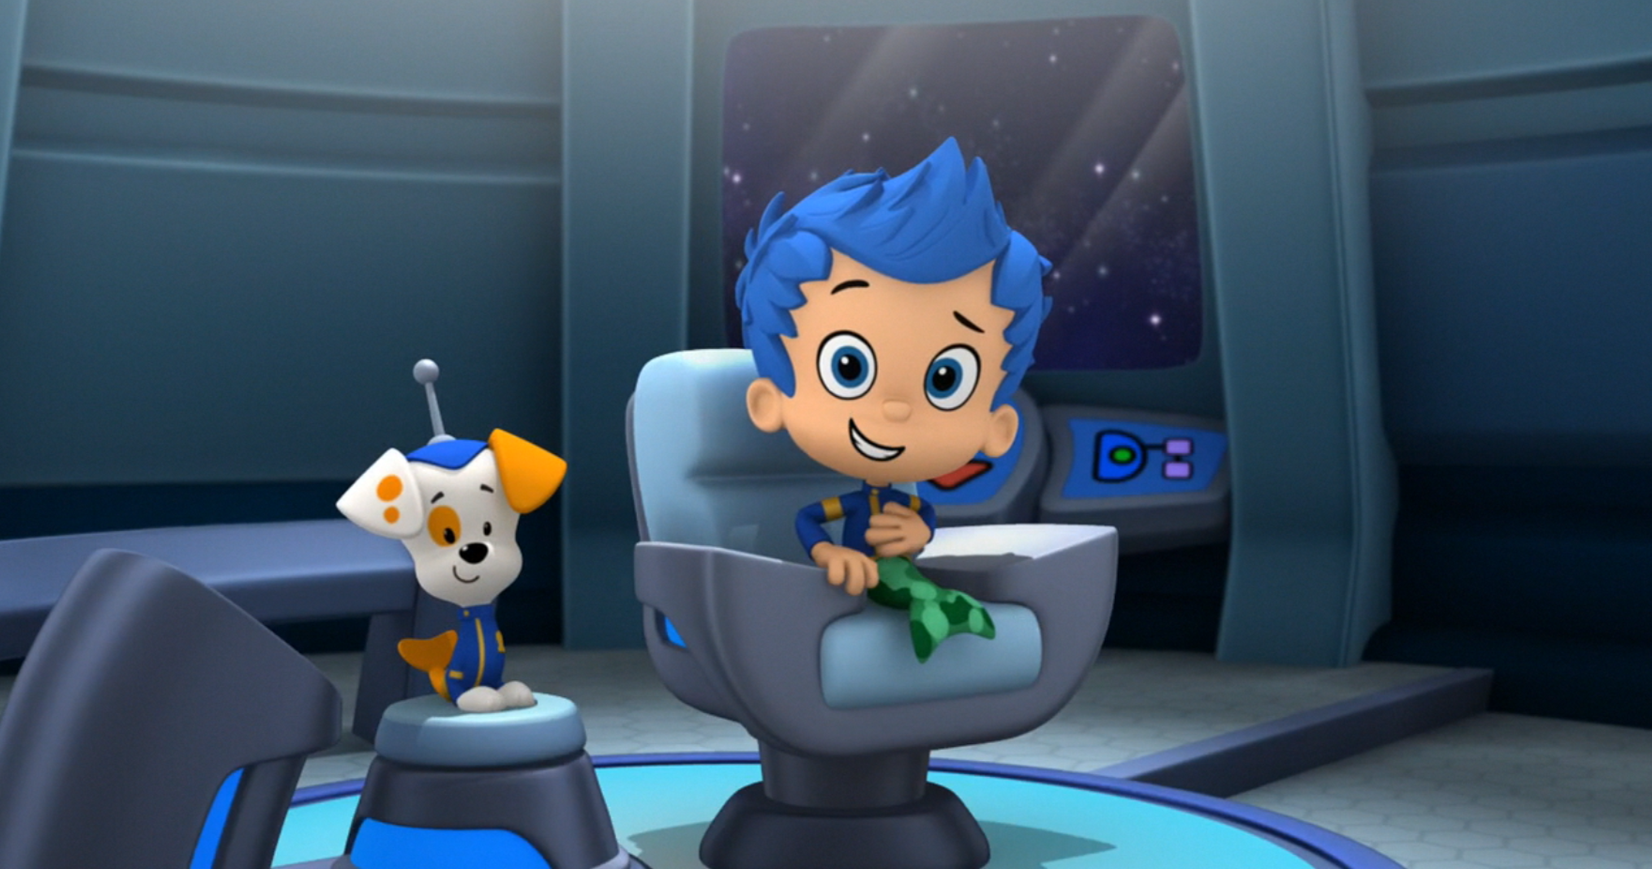 Space Guppies!/Images | Bubble Guppies Wiki | FANDOM powered by Wikia